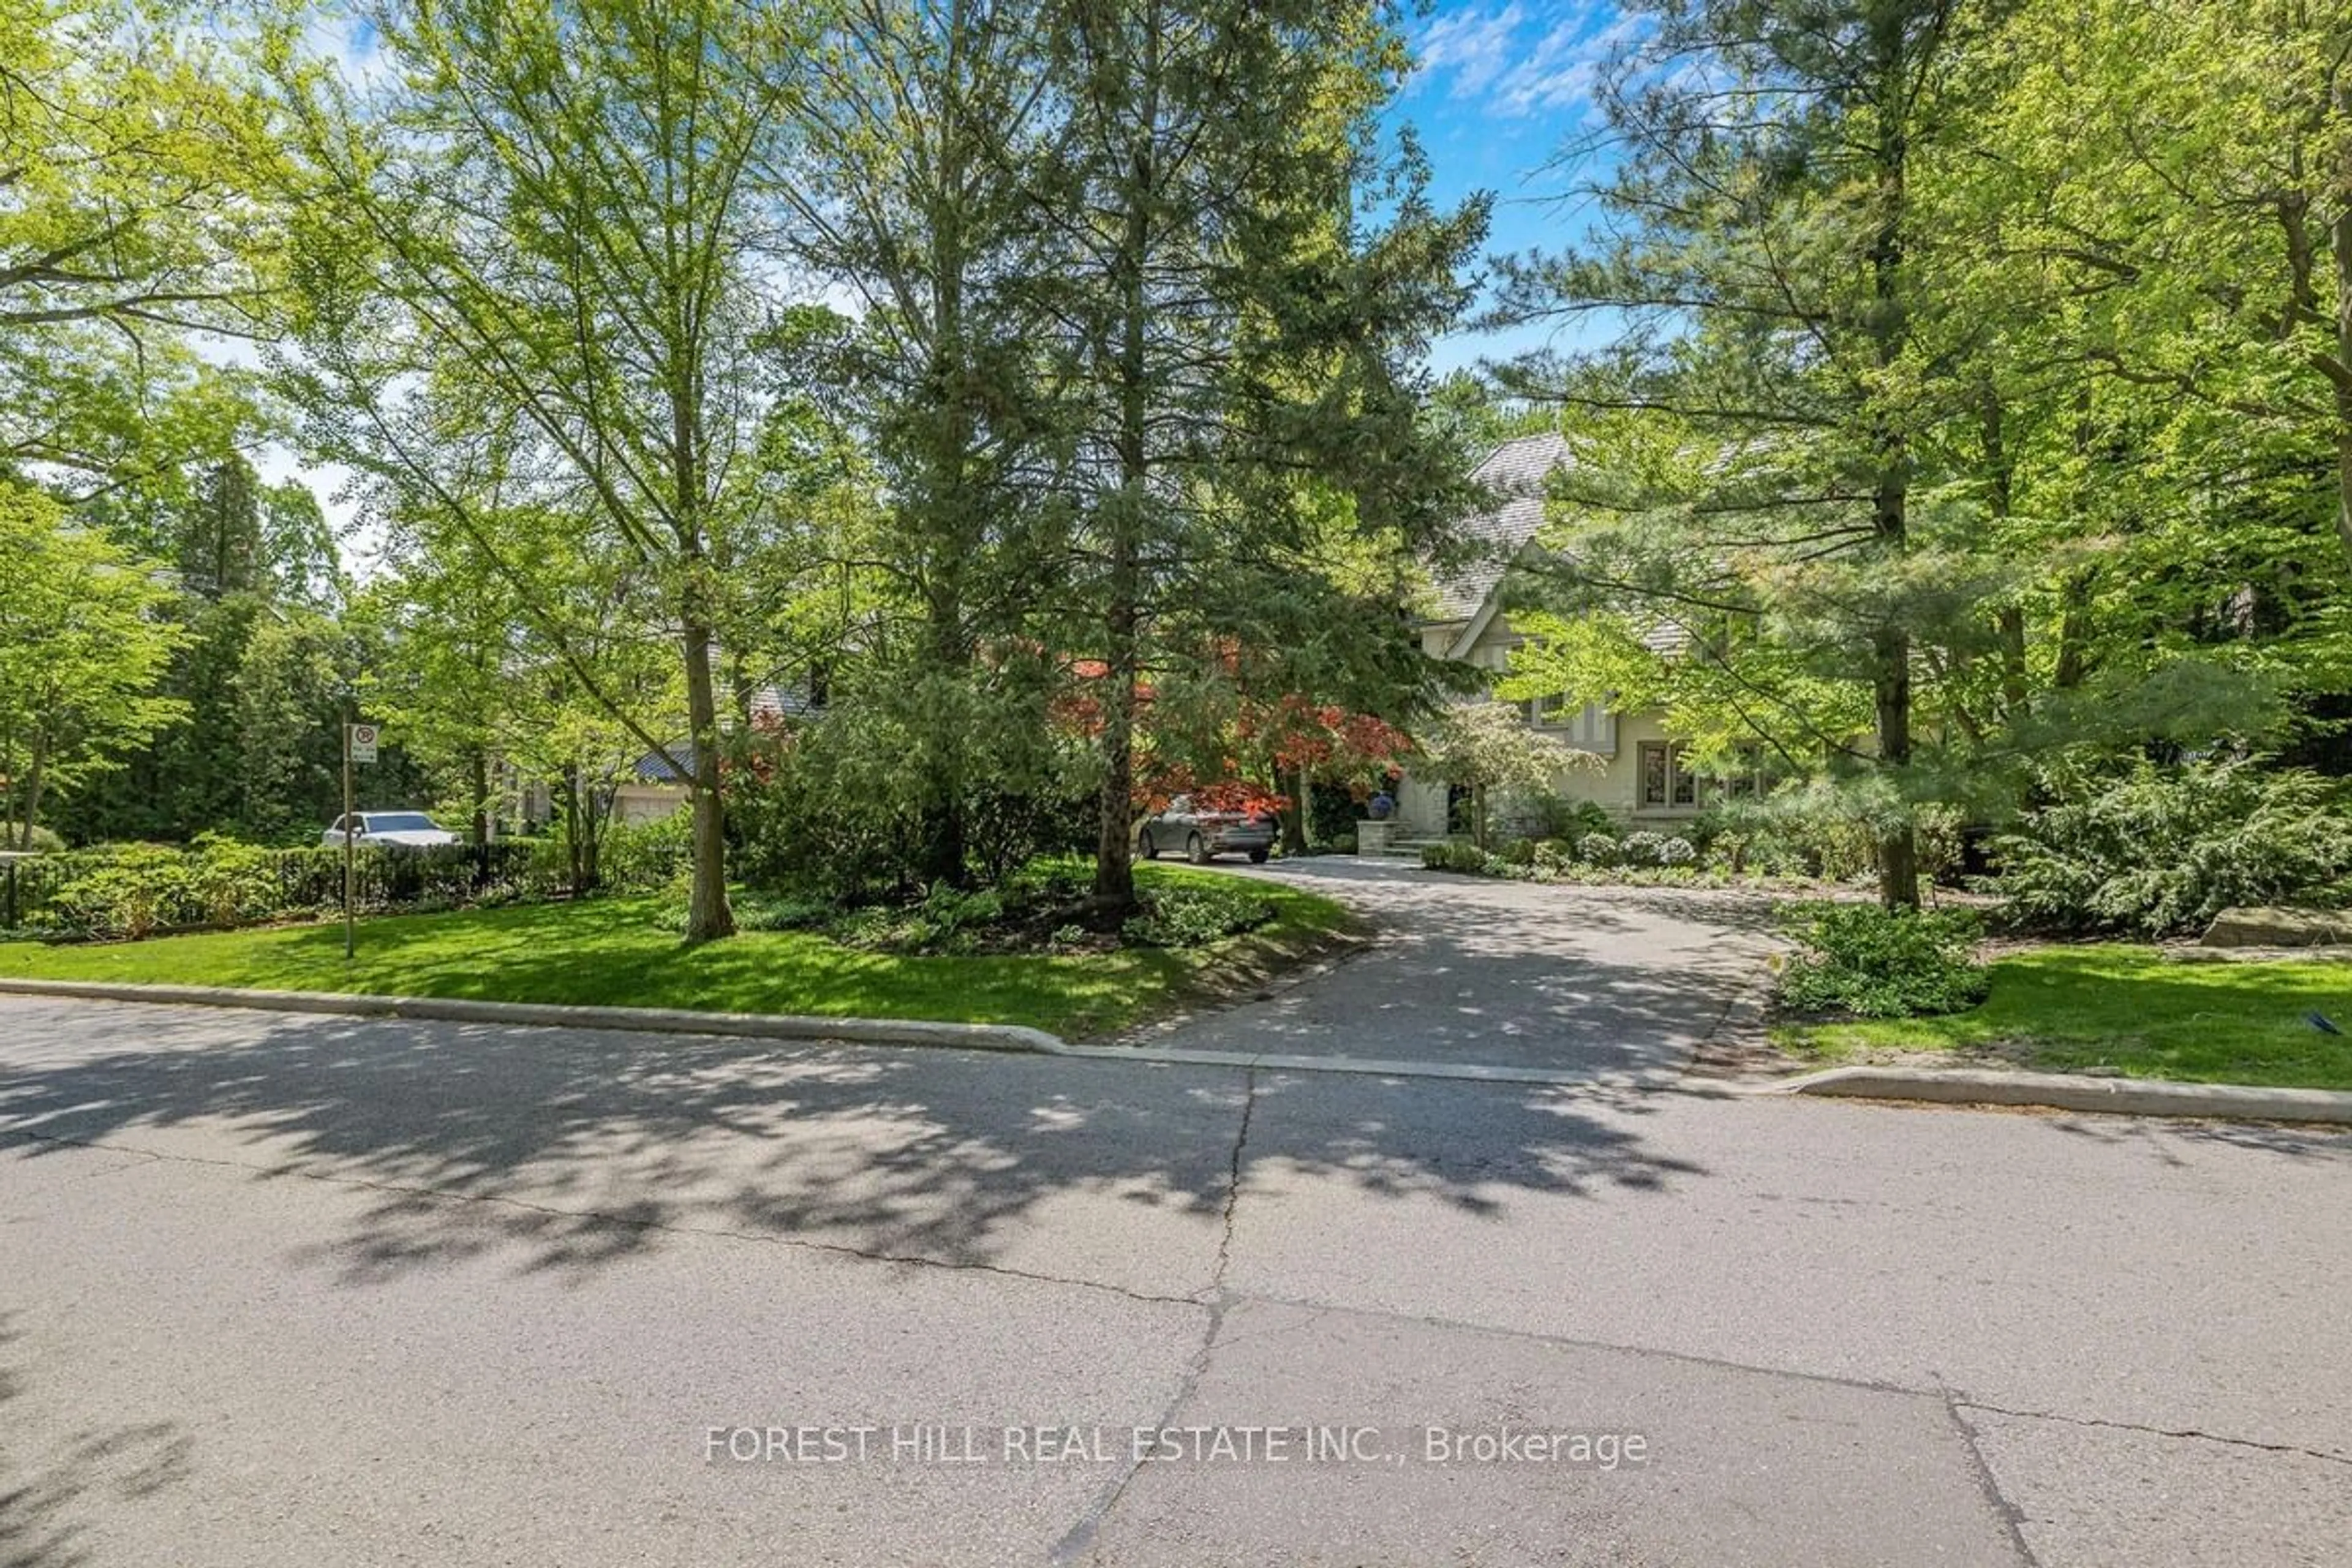 Street view for 110 Old Forest Hill Rd, Toronto Ontario M5P 2R9